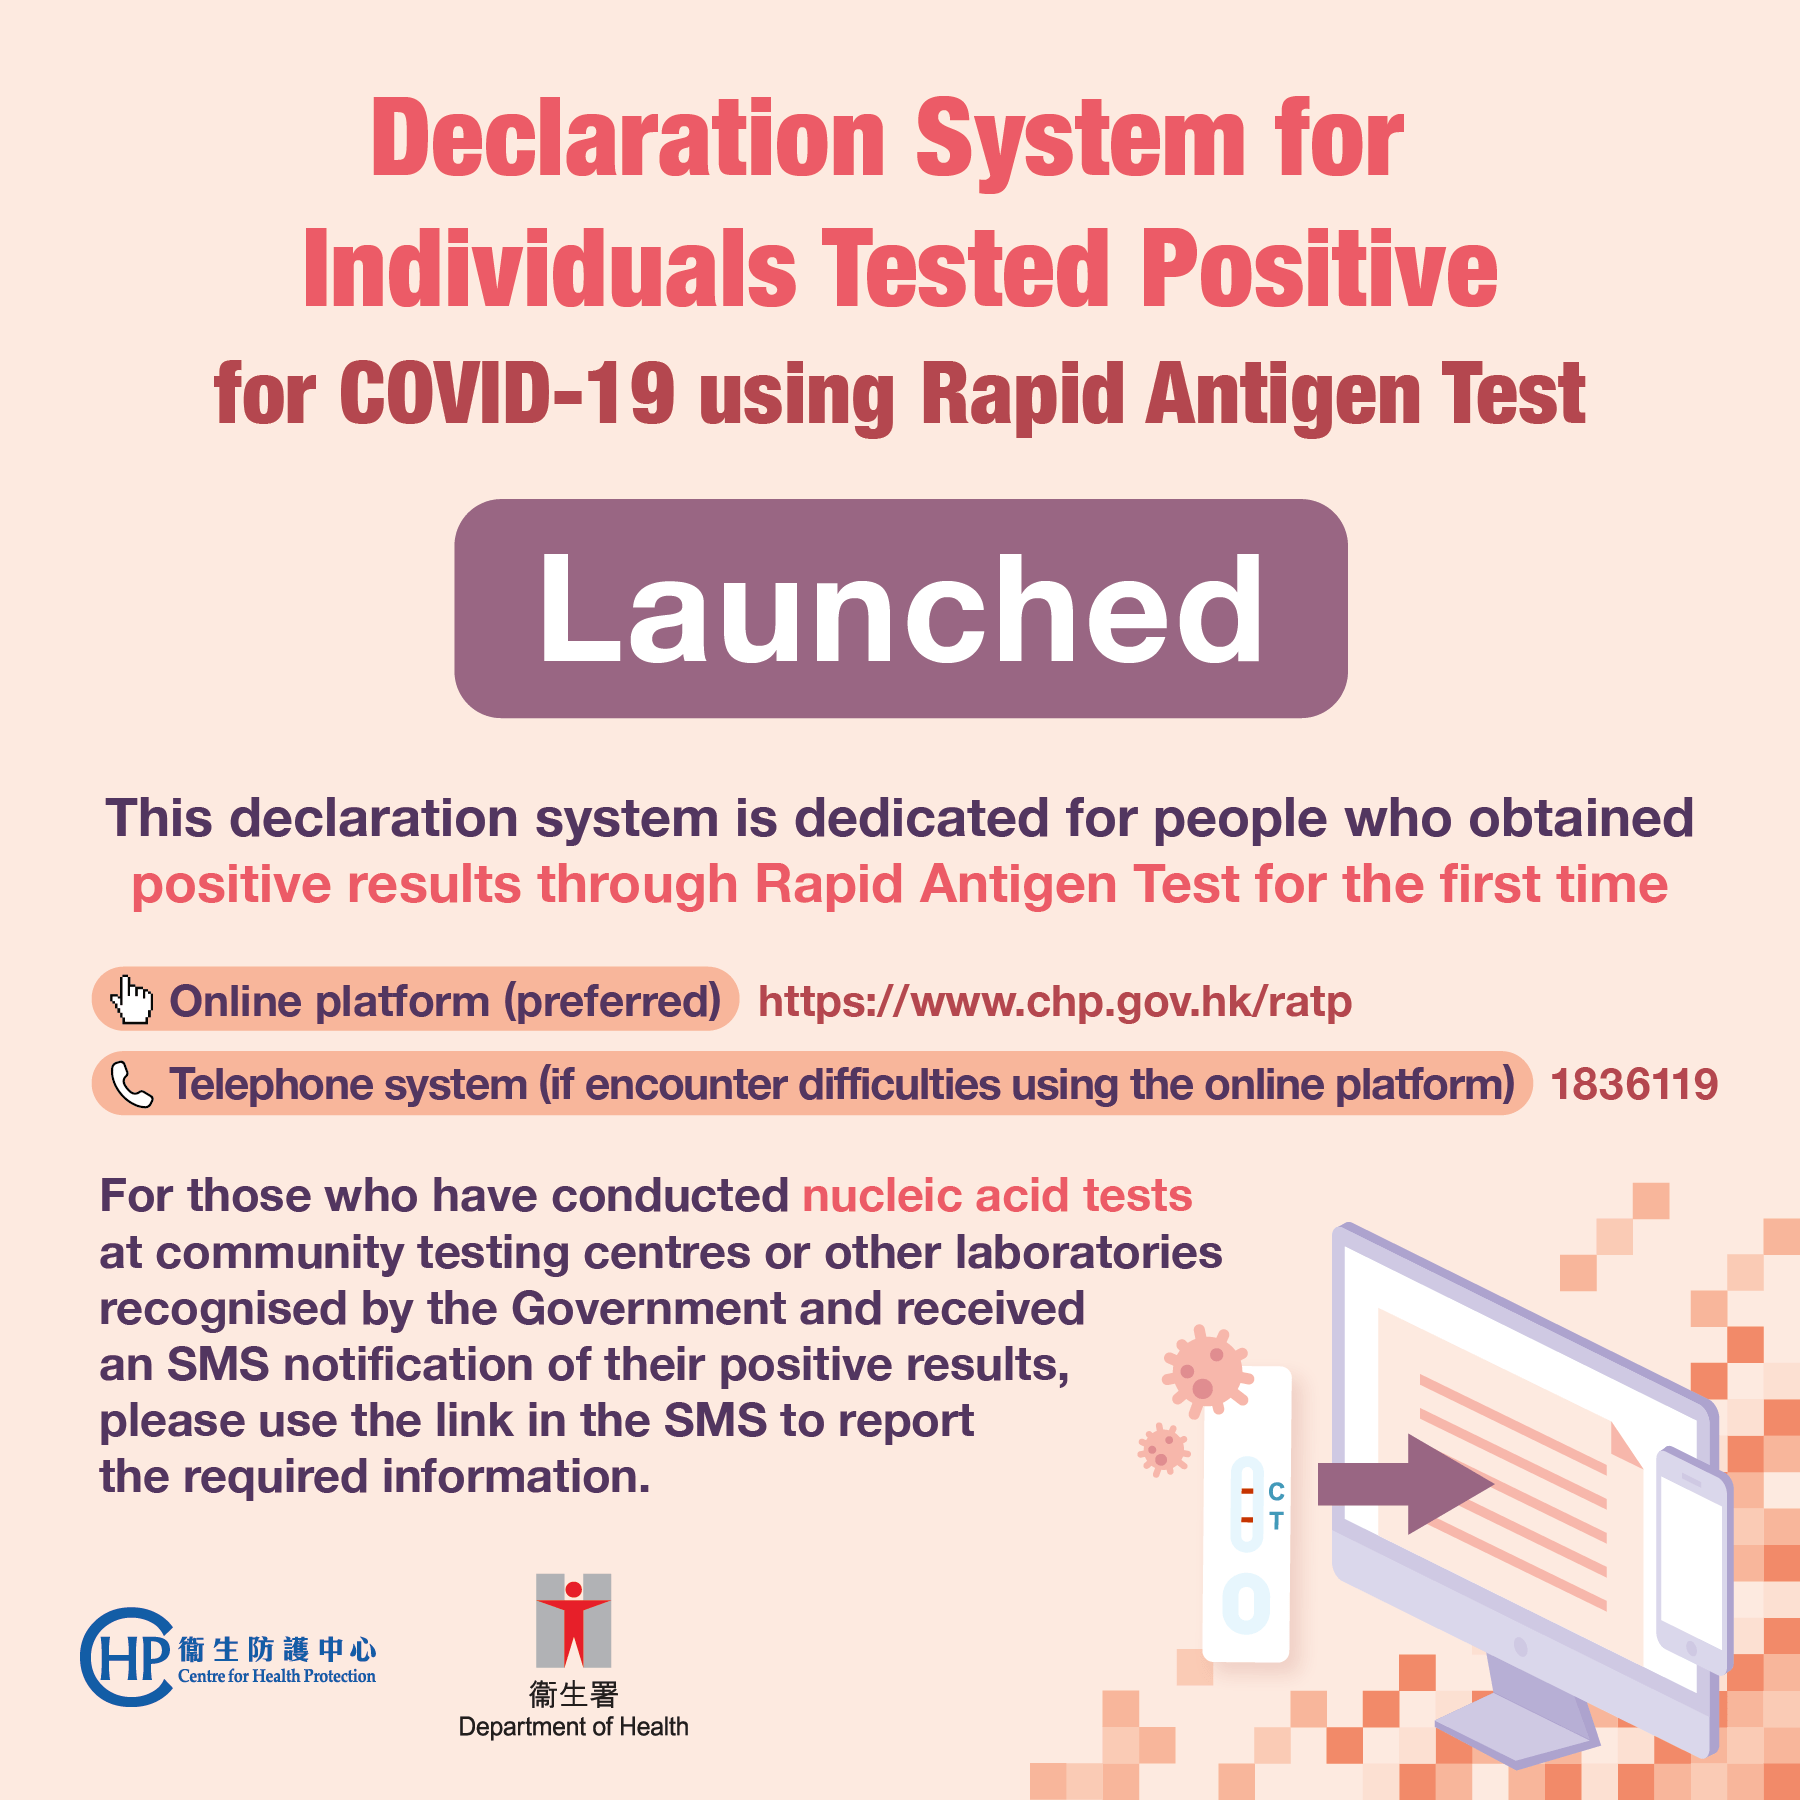 【”Declaration System for Individuals Tested Positive for COVID-19 using Rapid Antigen Test” launched】